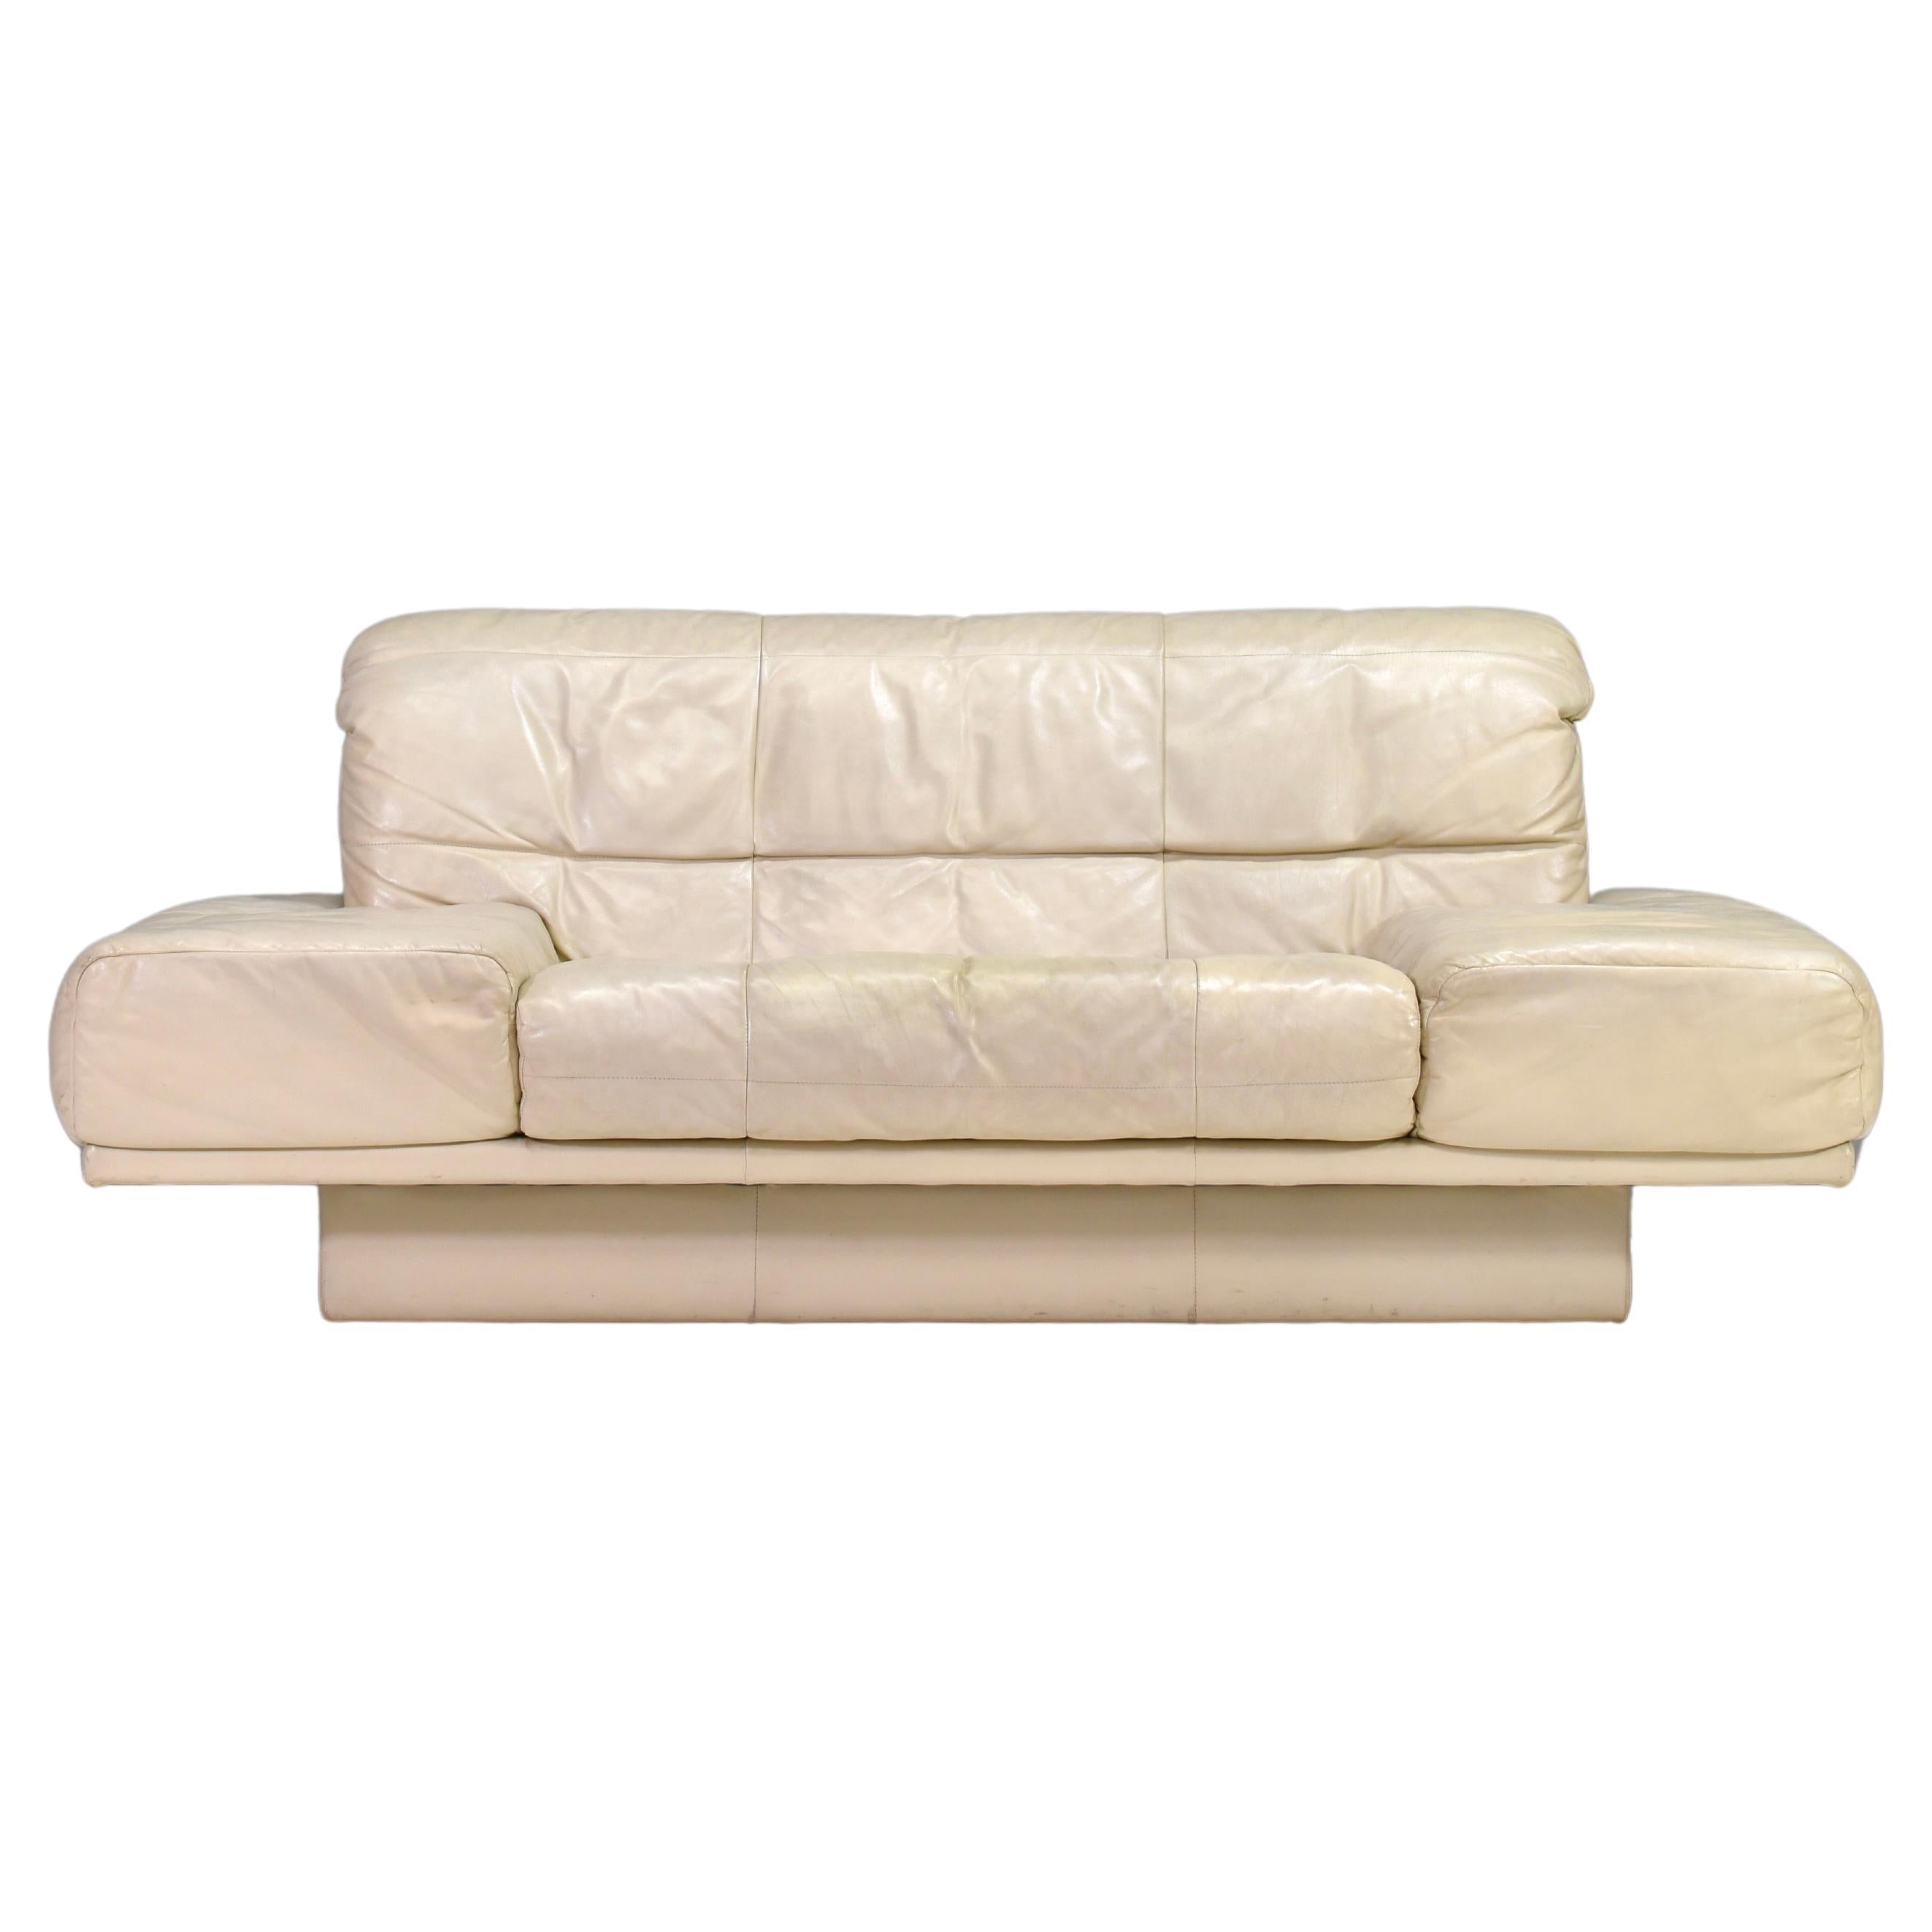 Rolf Benz 2-seat sofa in Ivory Cream White Leather – Germany, circa 1980-1990 For Sale